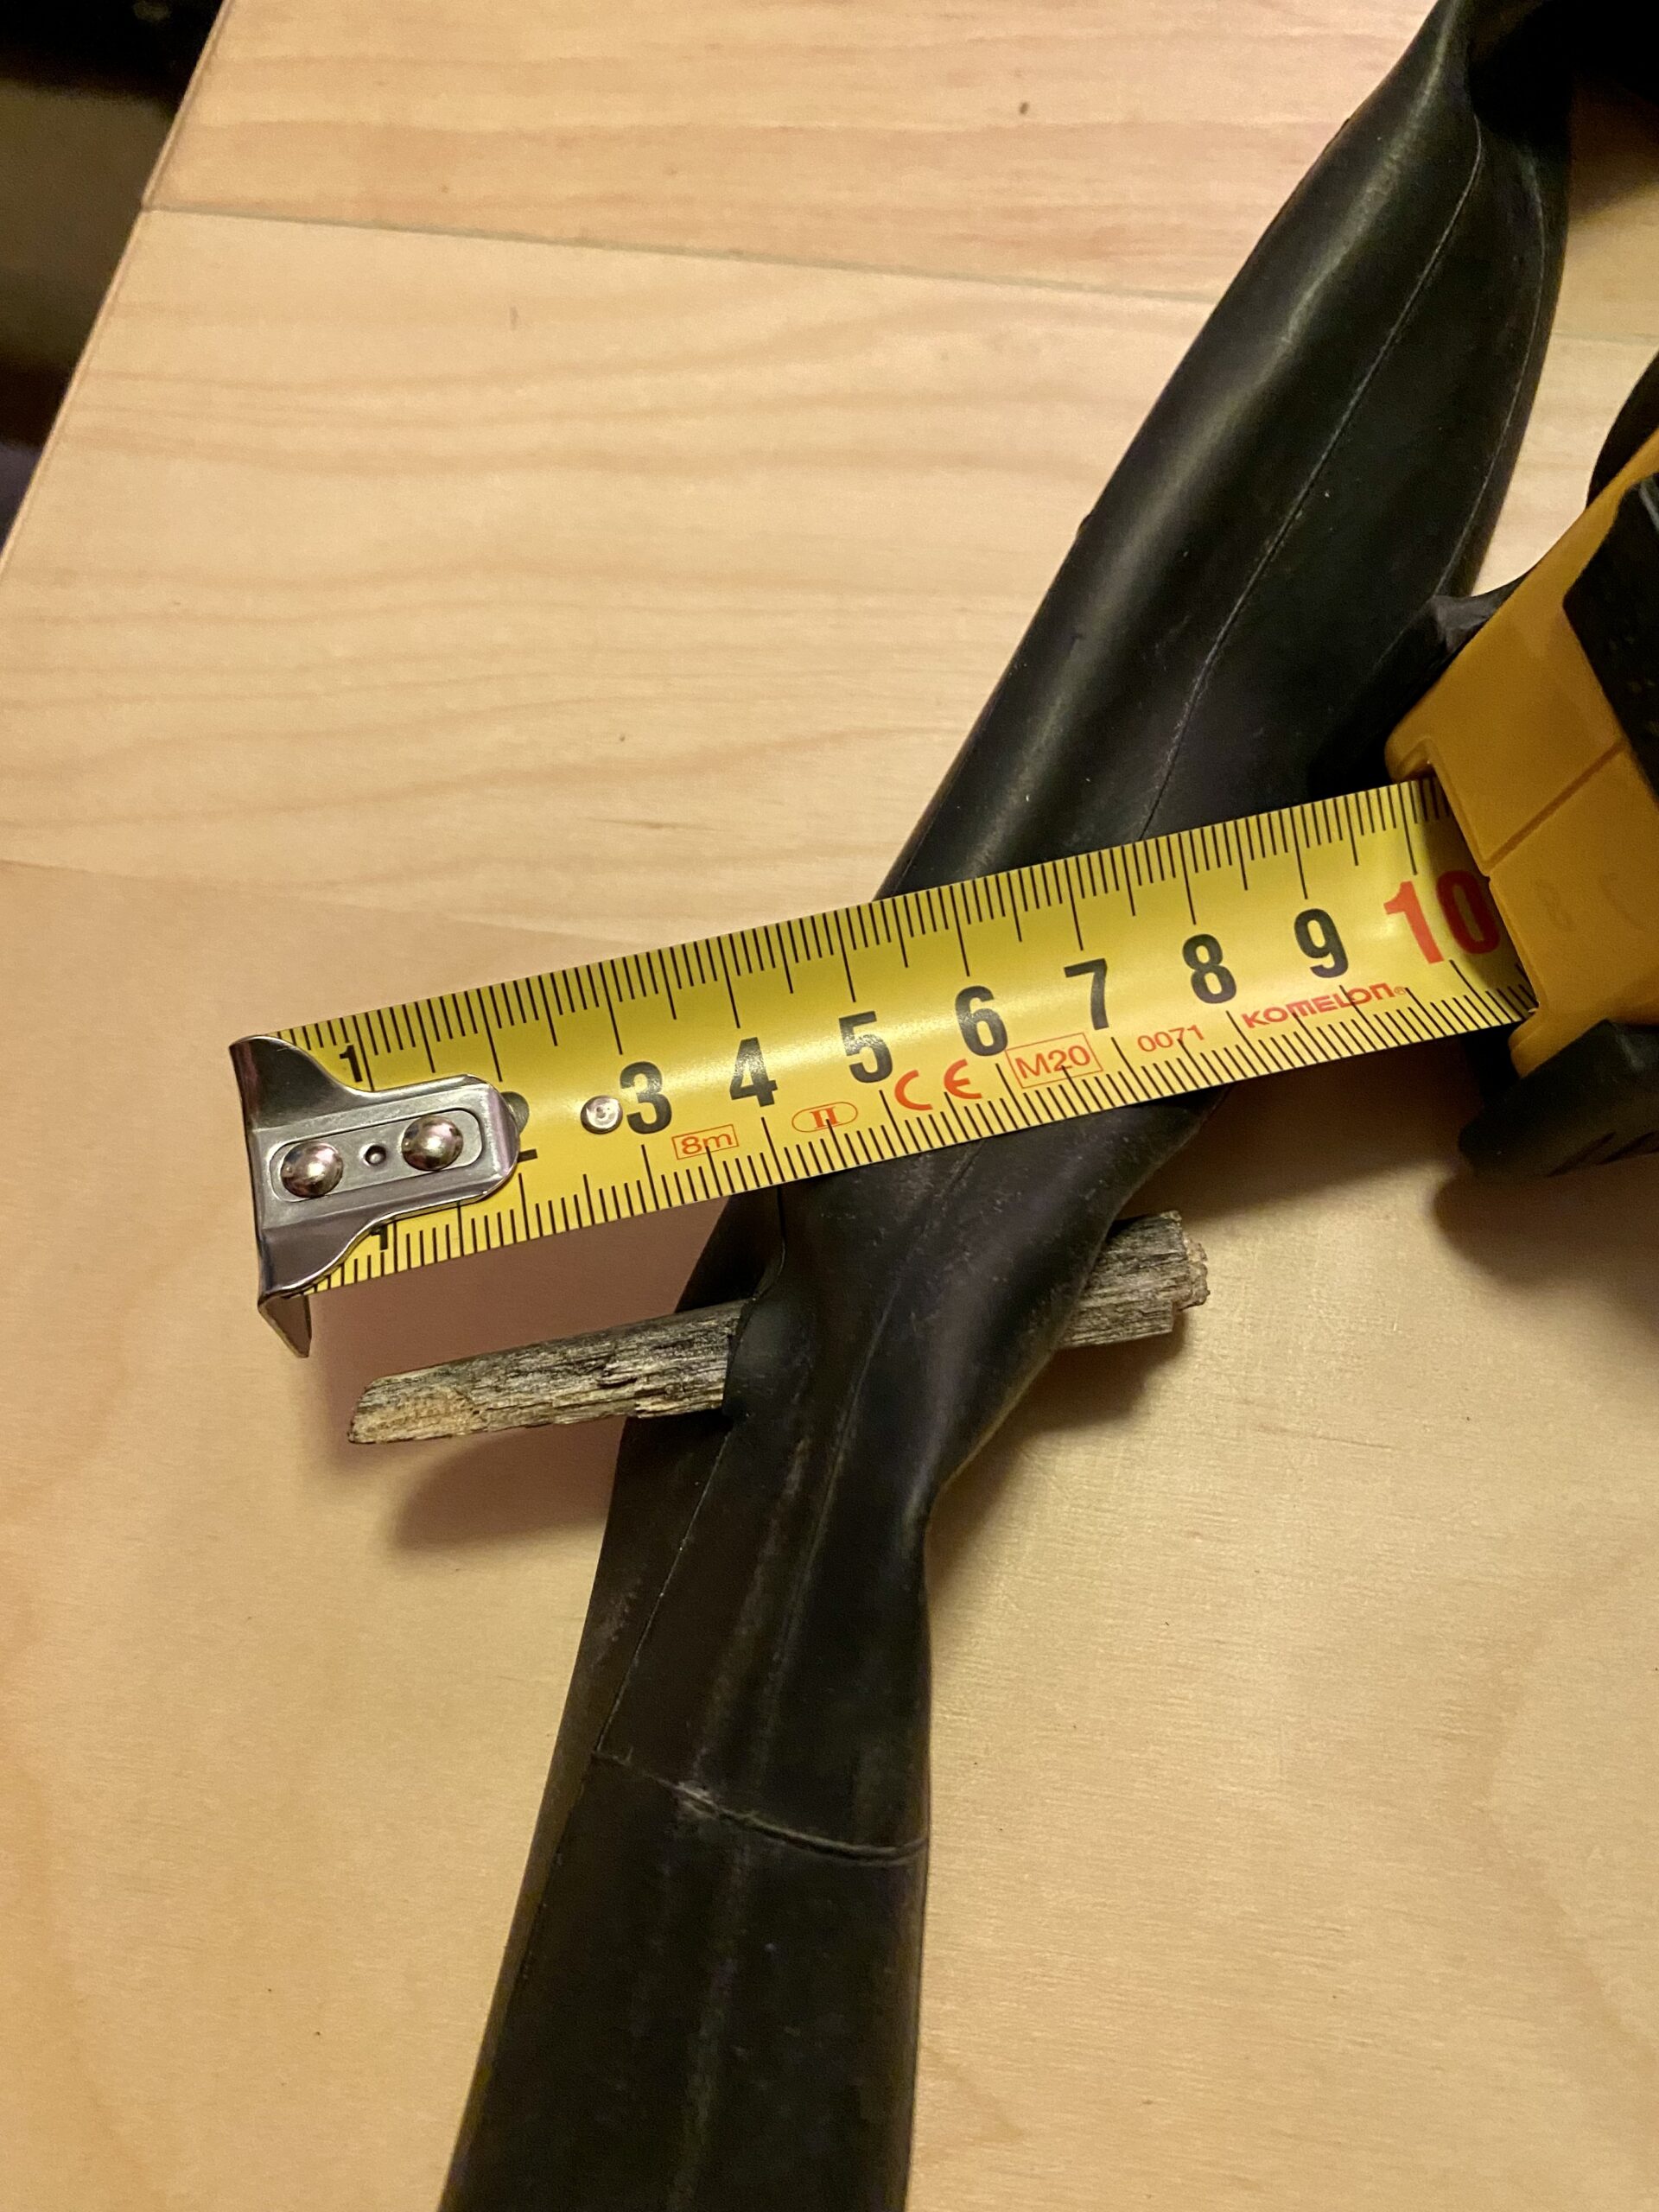 A large shard of wood pushed completely through an inner tube. There is a tape measure next to the shard measuring it at 7 mm.